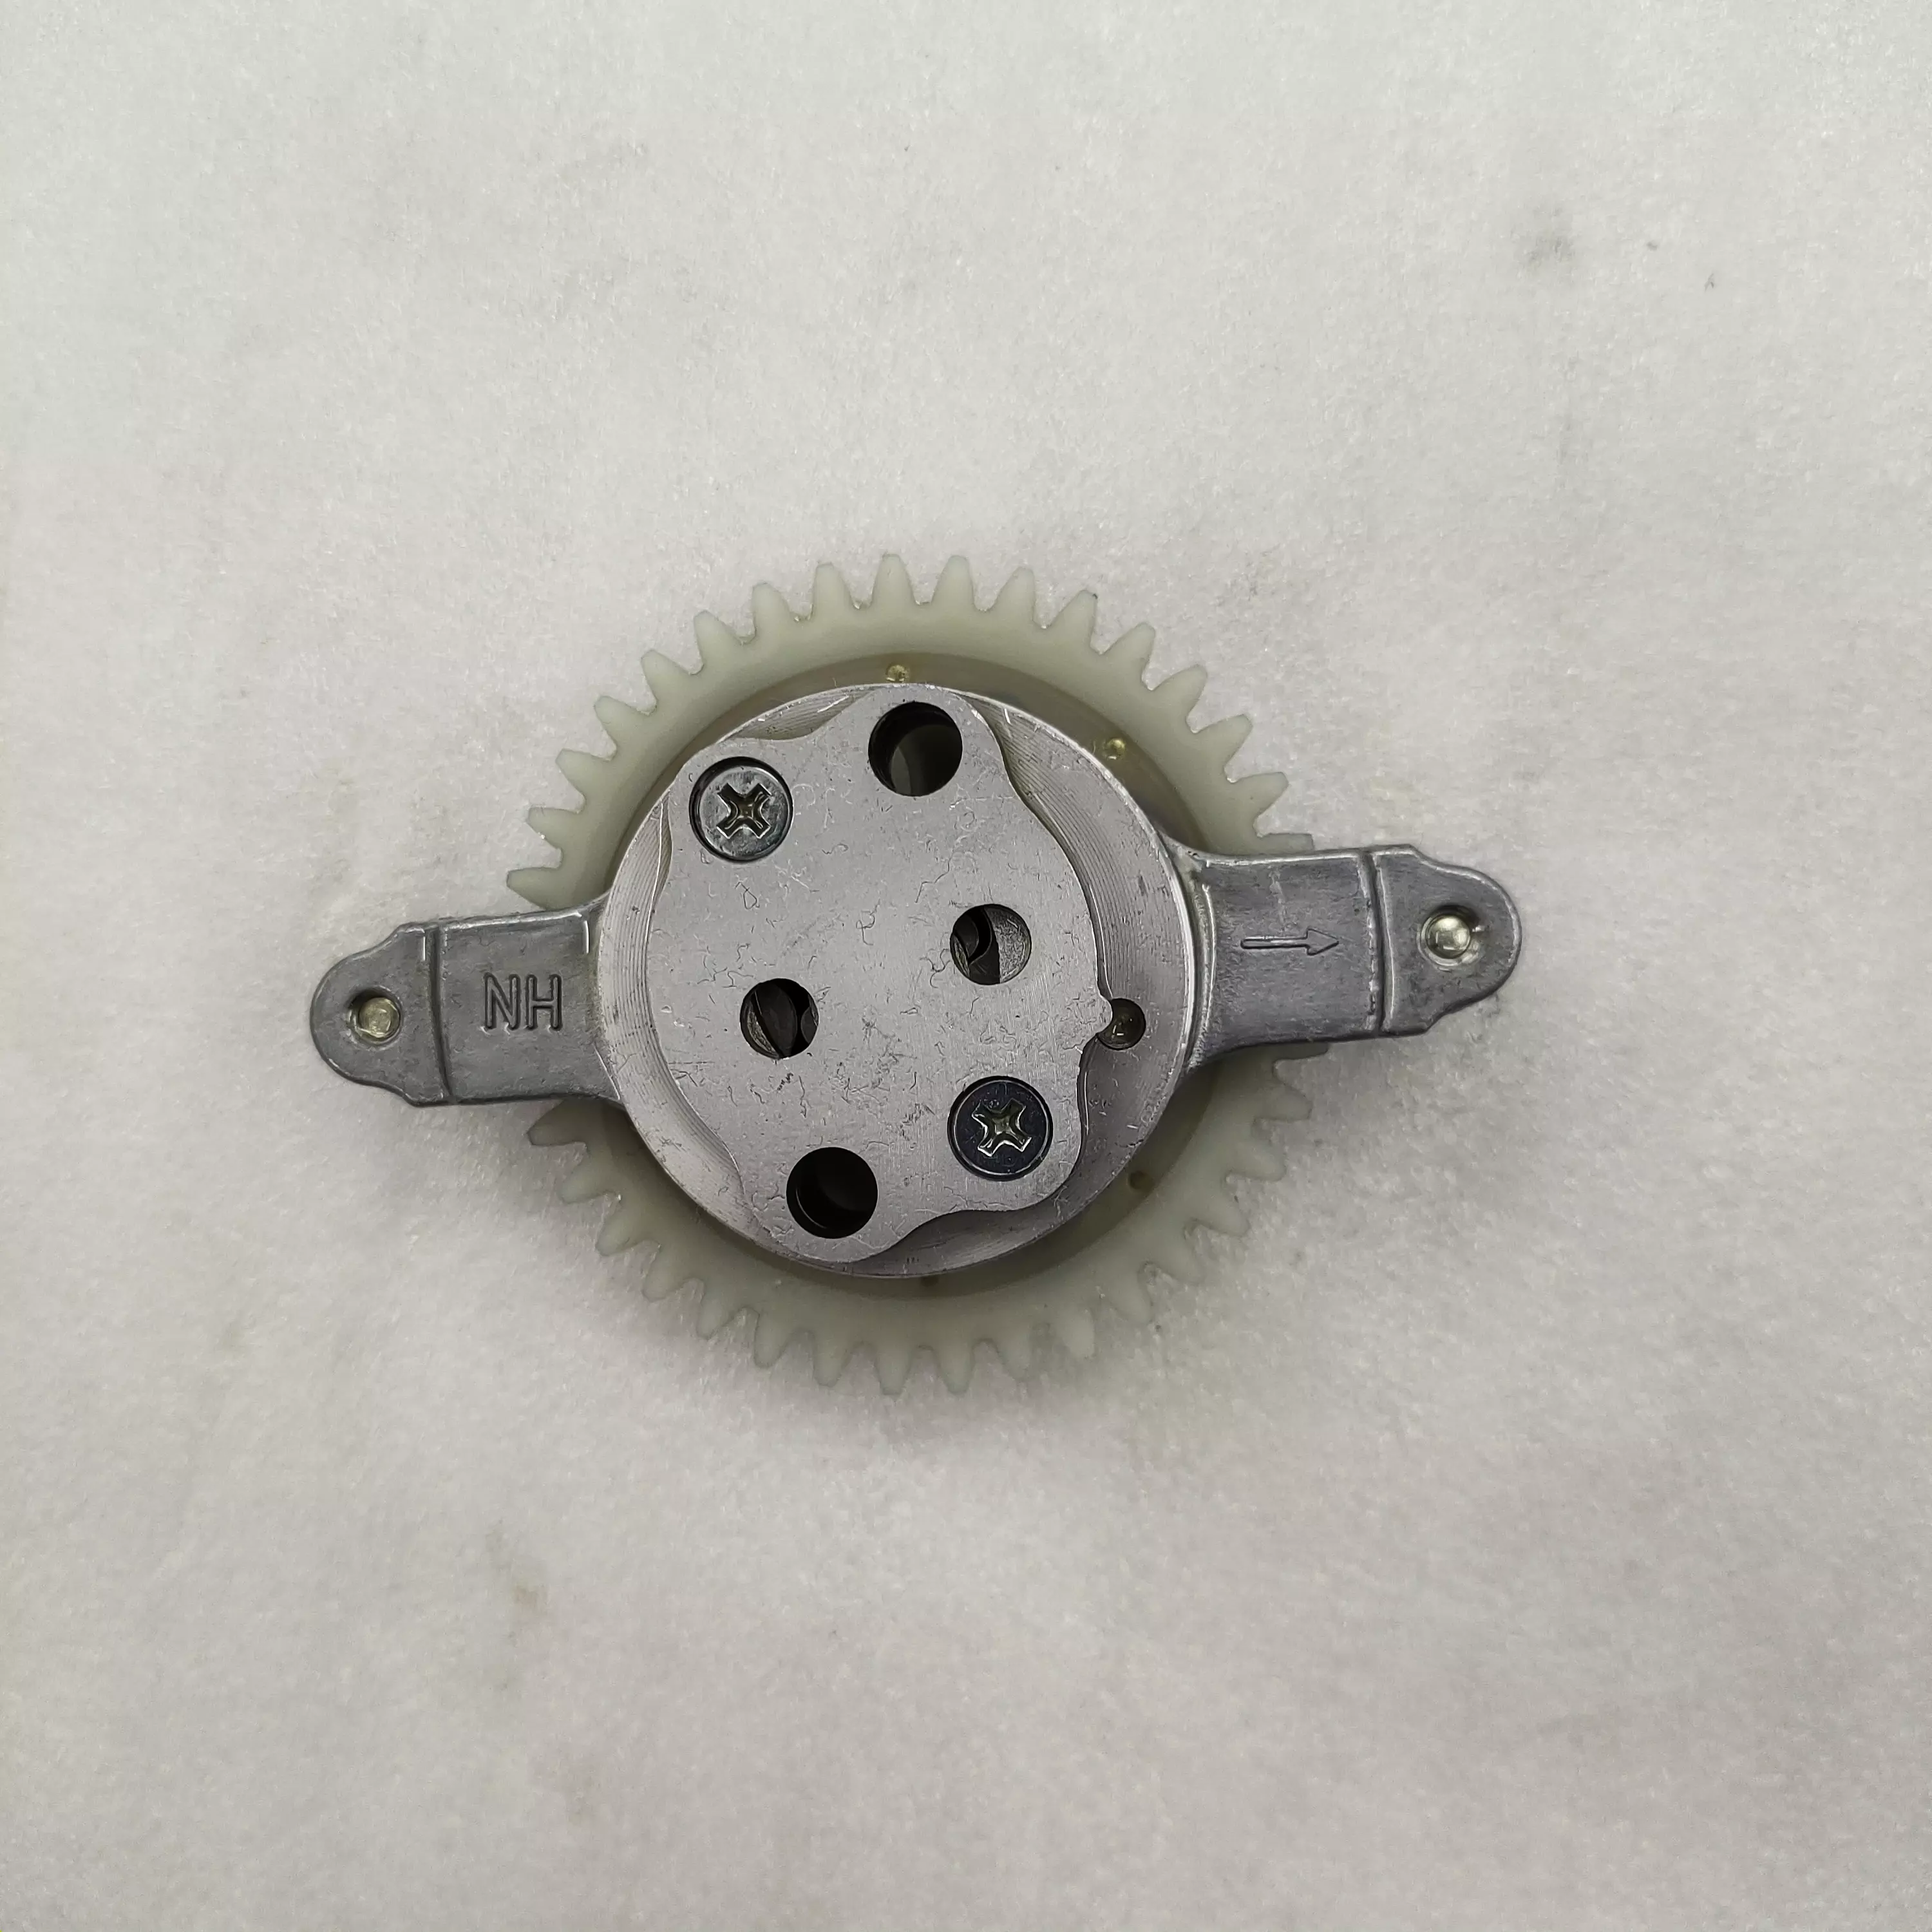 DAYANG Factory High Quality Factory Price Motorcycle Engine Parts Oil Pump CG150 Oil Pump